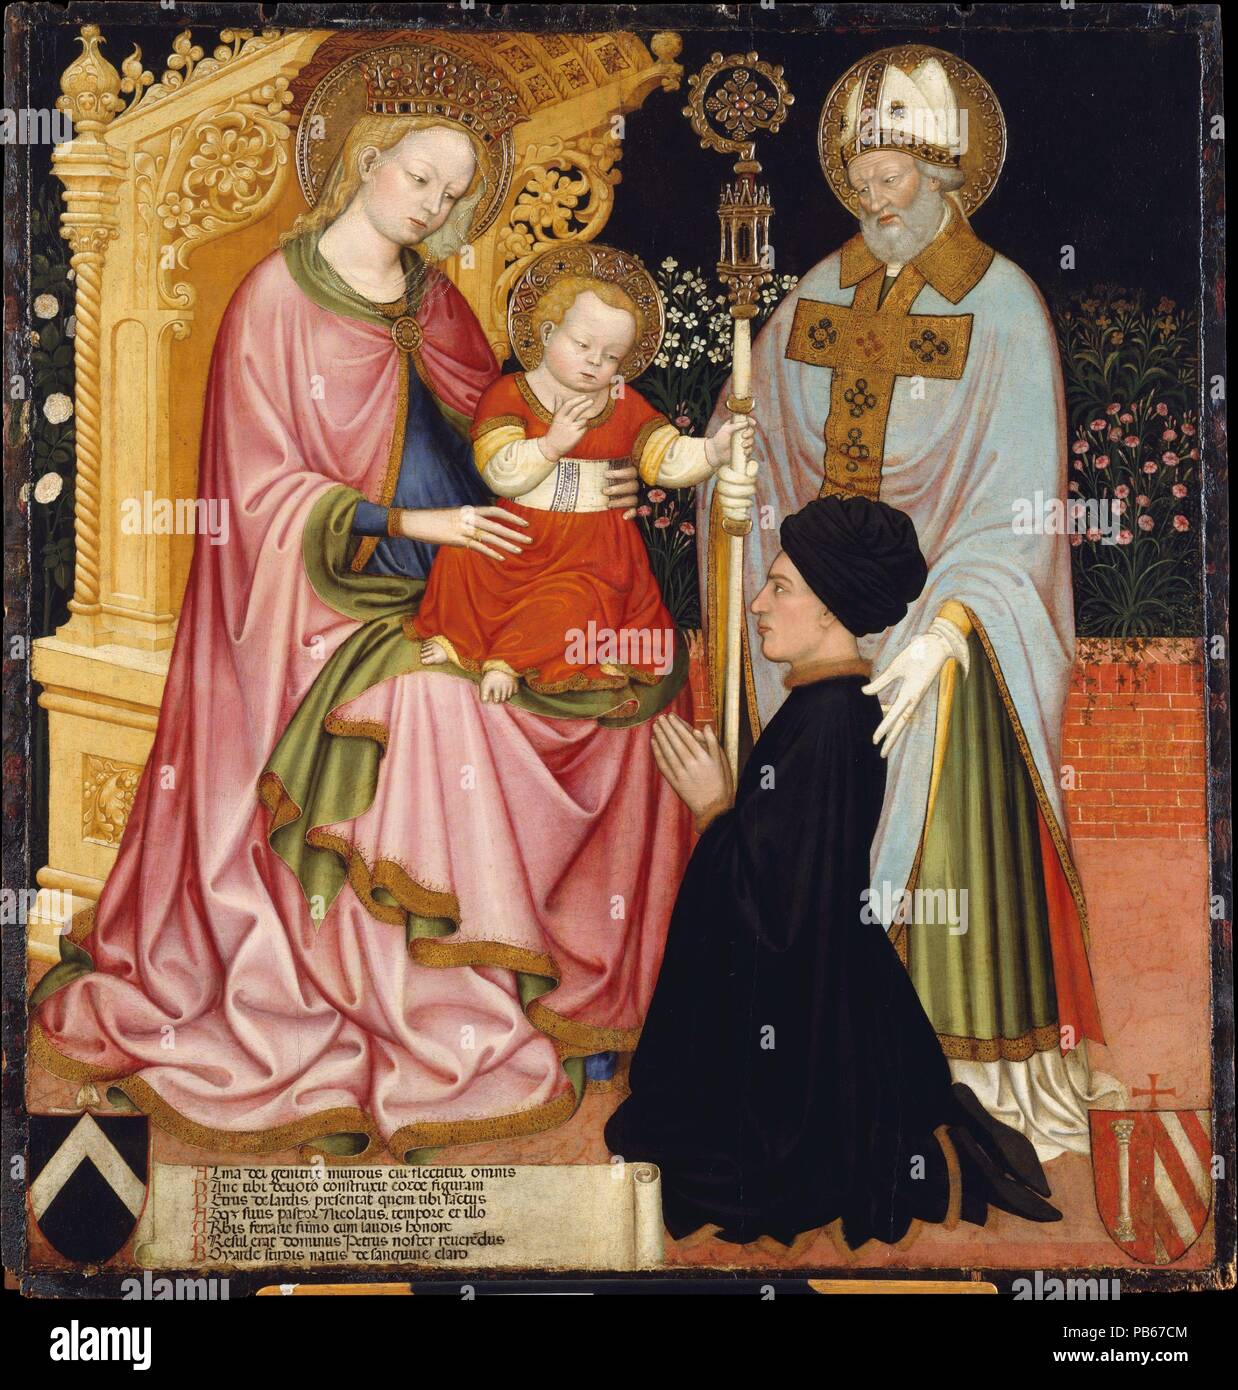 Madonna and Child with the Donor, Pietro de' Lardi, Presented by Saint Nicholas. Artist: Master G.Z. (possibly Michele dai Carri, Ferrara, active by 1405-died 1441 Ferrara). Dimensions: Overall 45 7/8 x 43 5/8 in. (116.5 x 110.8 cm); painted surface 44 1/8 x 41 3/4 in. (112.1 x 106 cm). Date: ca. 1420-30.  This altarpiece bears testimony to the level of naturalistic description achieved in the city of Ferrara in the early fifteenth century. The sky, which now appears almost black, would originally have been lighter in color. Pietro de' Lardi, who commissioned this important work, became deputy Stock Photo